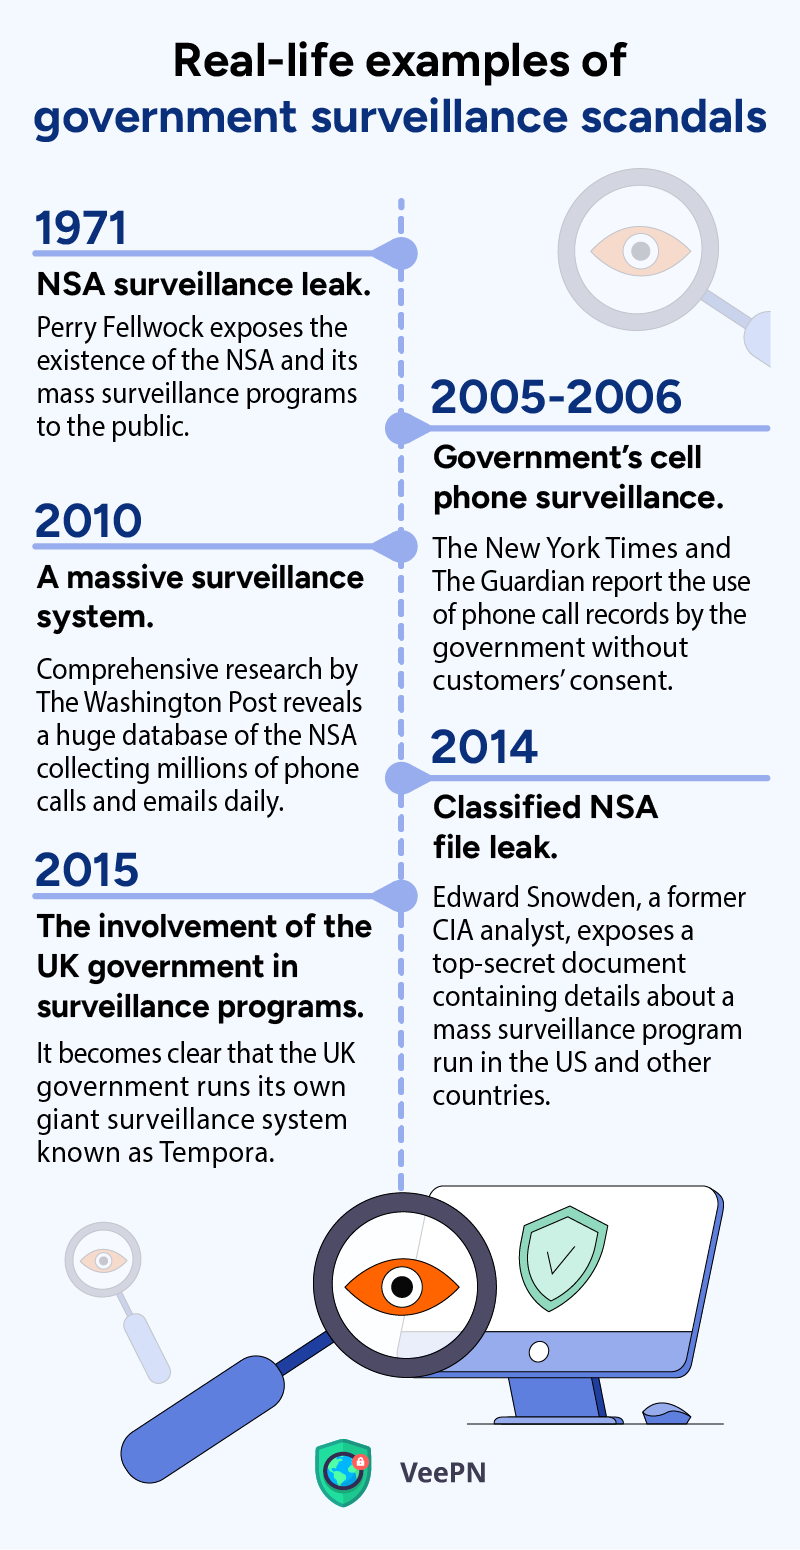 Real-life examples of government surveillance scandals